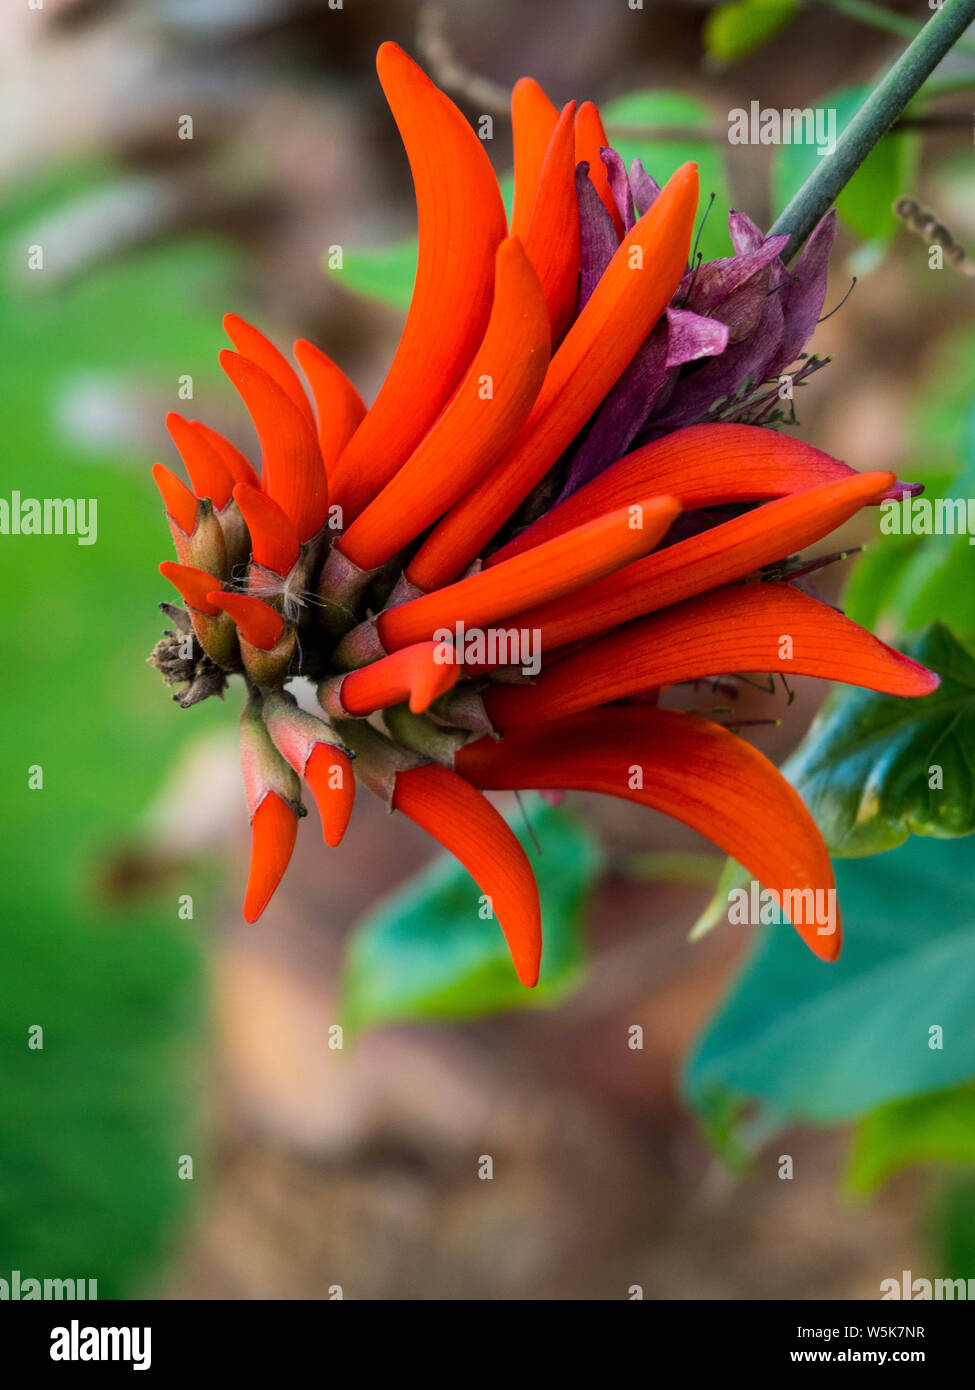 Flower of Erythrina spinosa (Erythrina corallodendrum) with green leaves Stock Photo